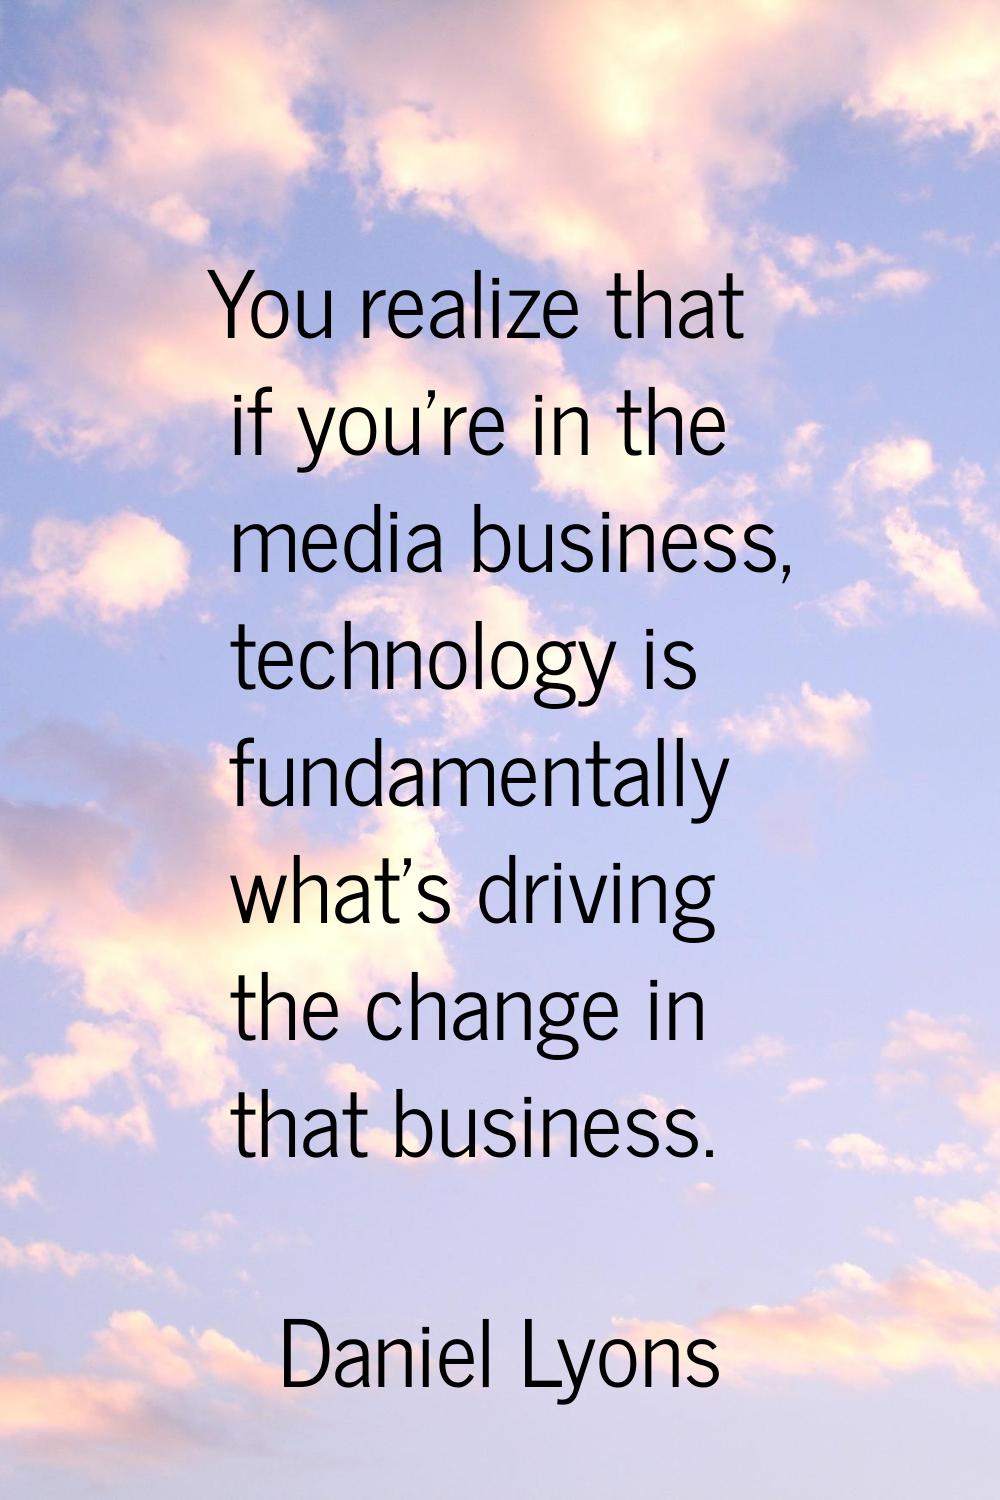 You realize that if you're in the media business, technology is fundamentally what's driving the ch